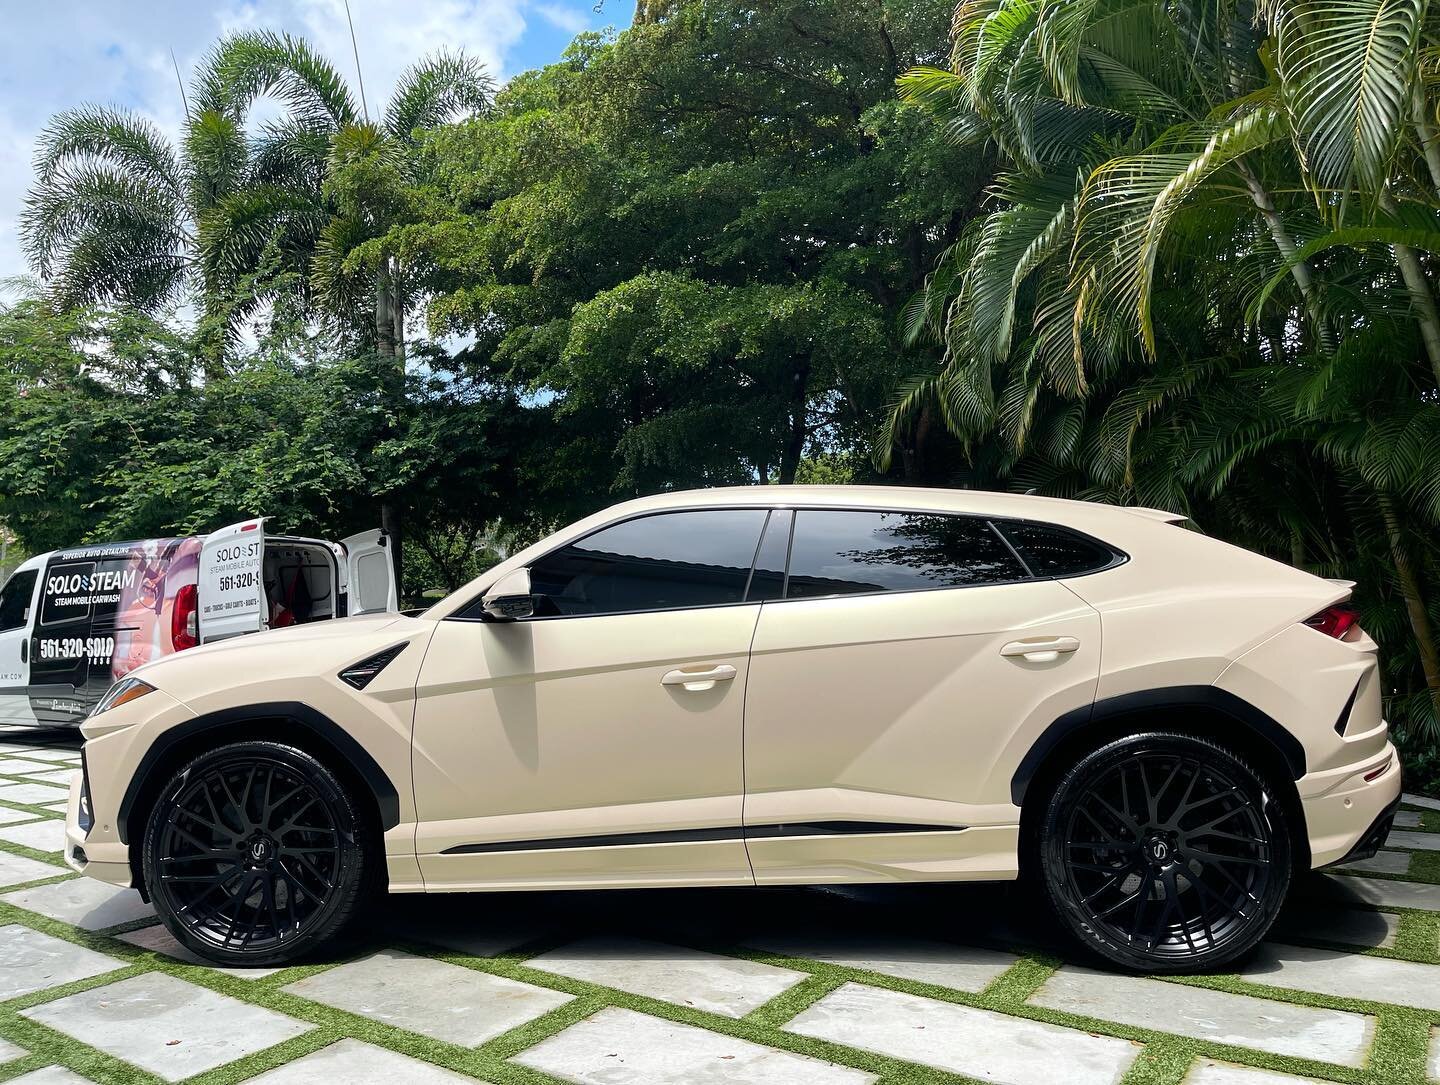 The pure Lamborghini design and the outstanding performance makes the Urus absolutely unique

Get your luxury vehicles detailed by our team 😎
#solosteam